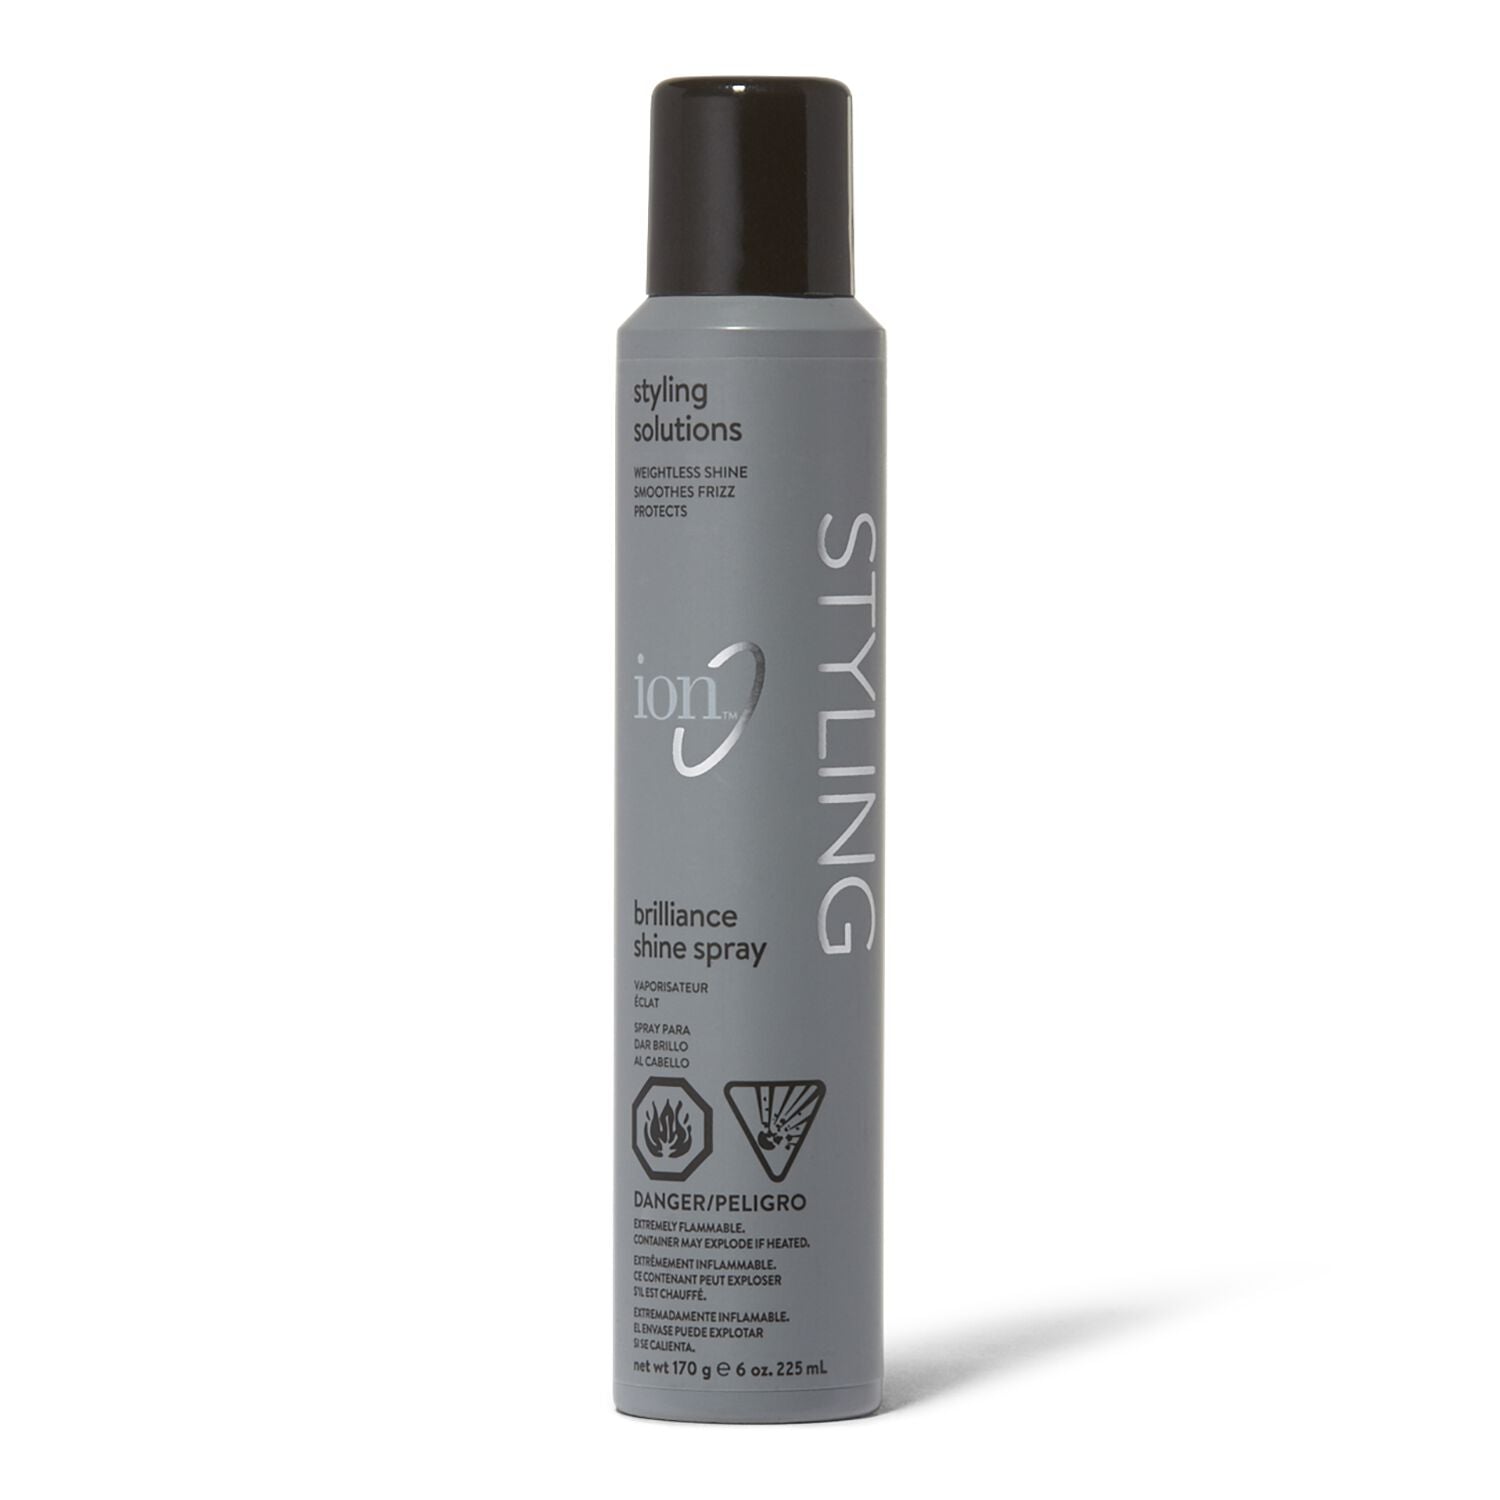 Styling Solutions  by   ion Brilliance Shine Spray